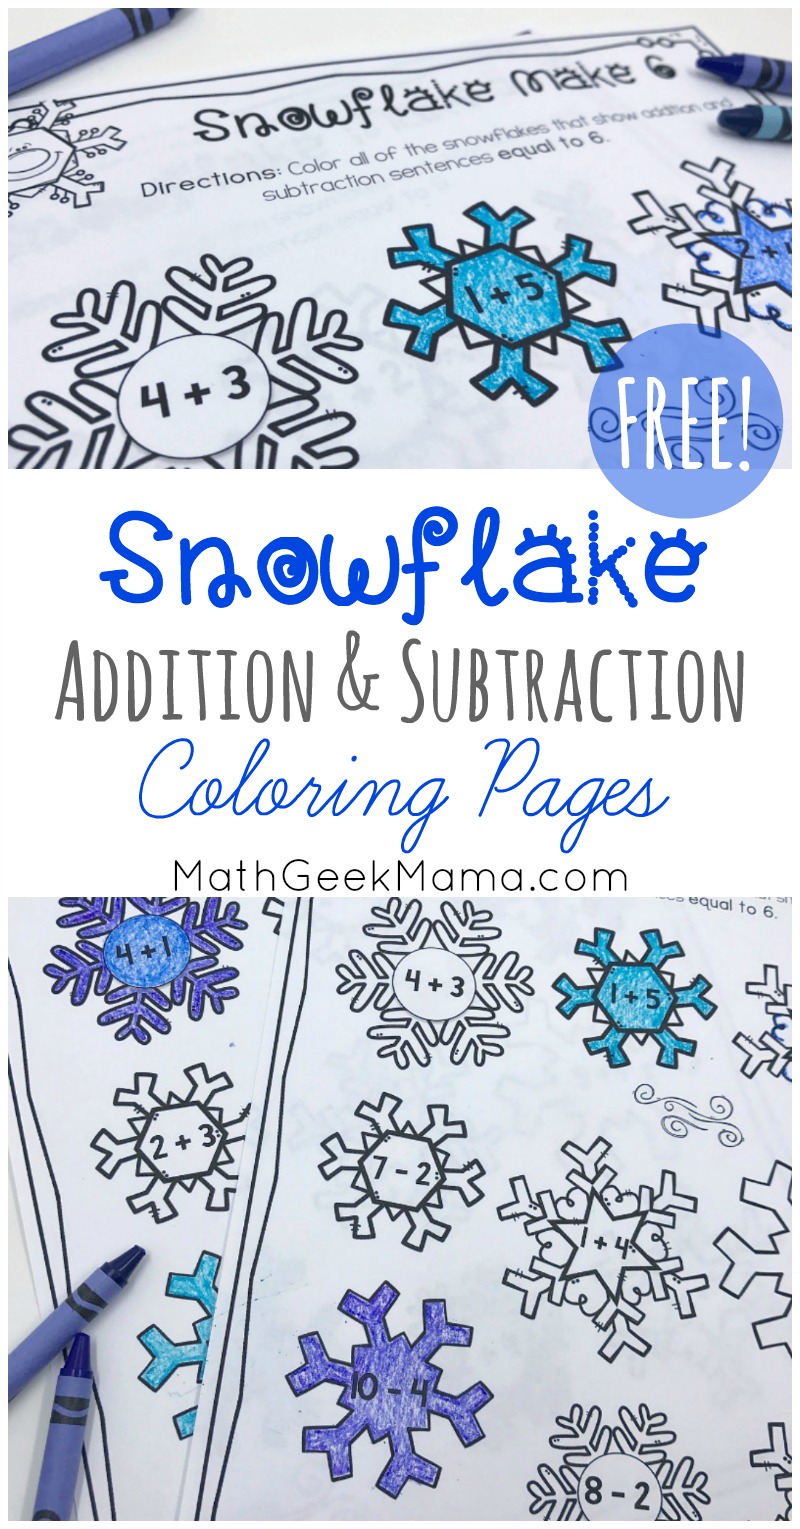 Want a cute and fun way to practice addition and subtraction facts to 10? These snowflake coloring pages are a great introduction to a discussion of patterns, composing and decomposing numbers and more. Get them FREE!